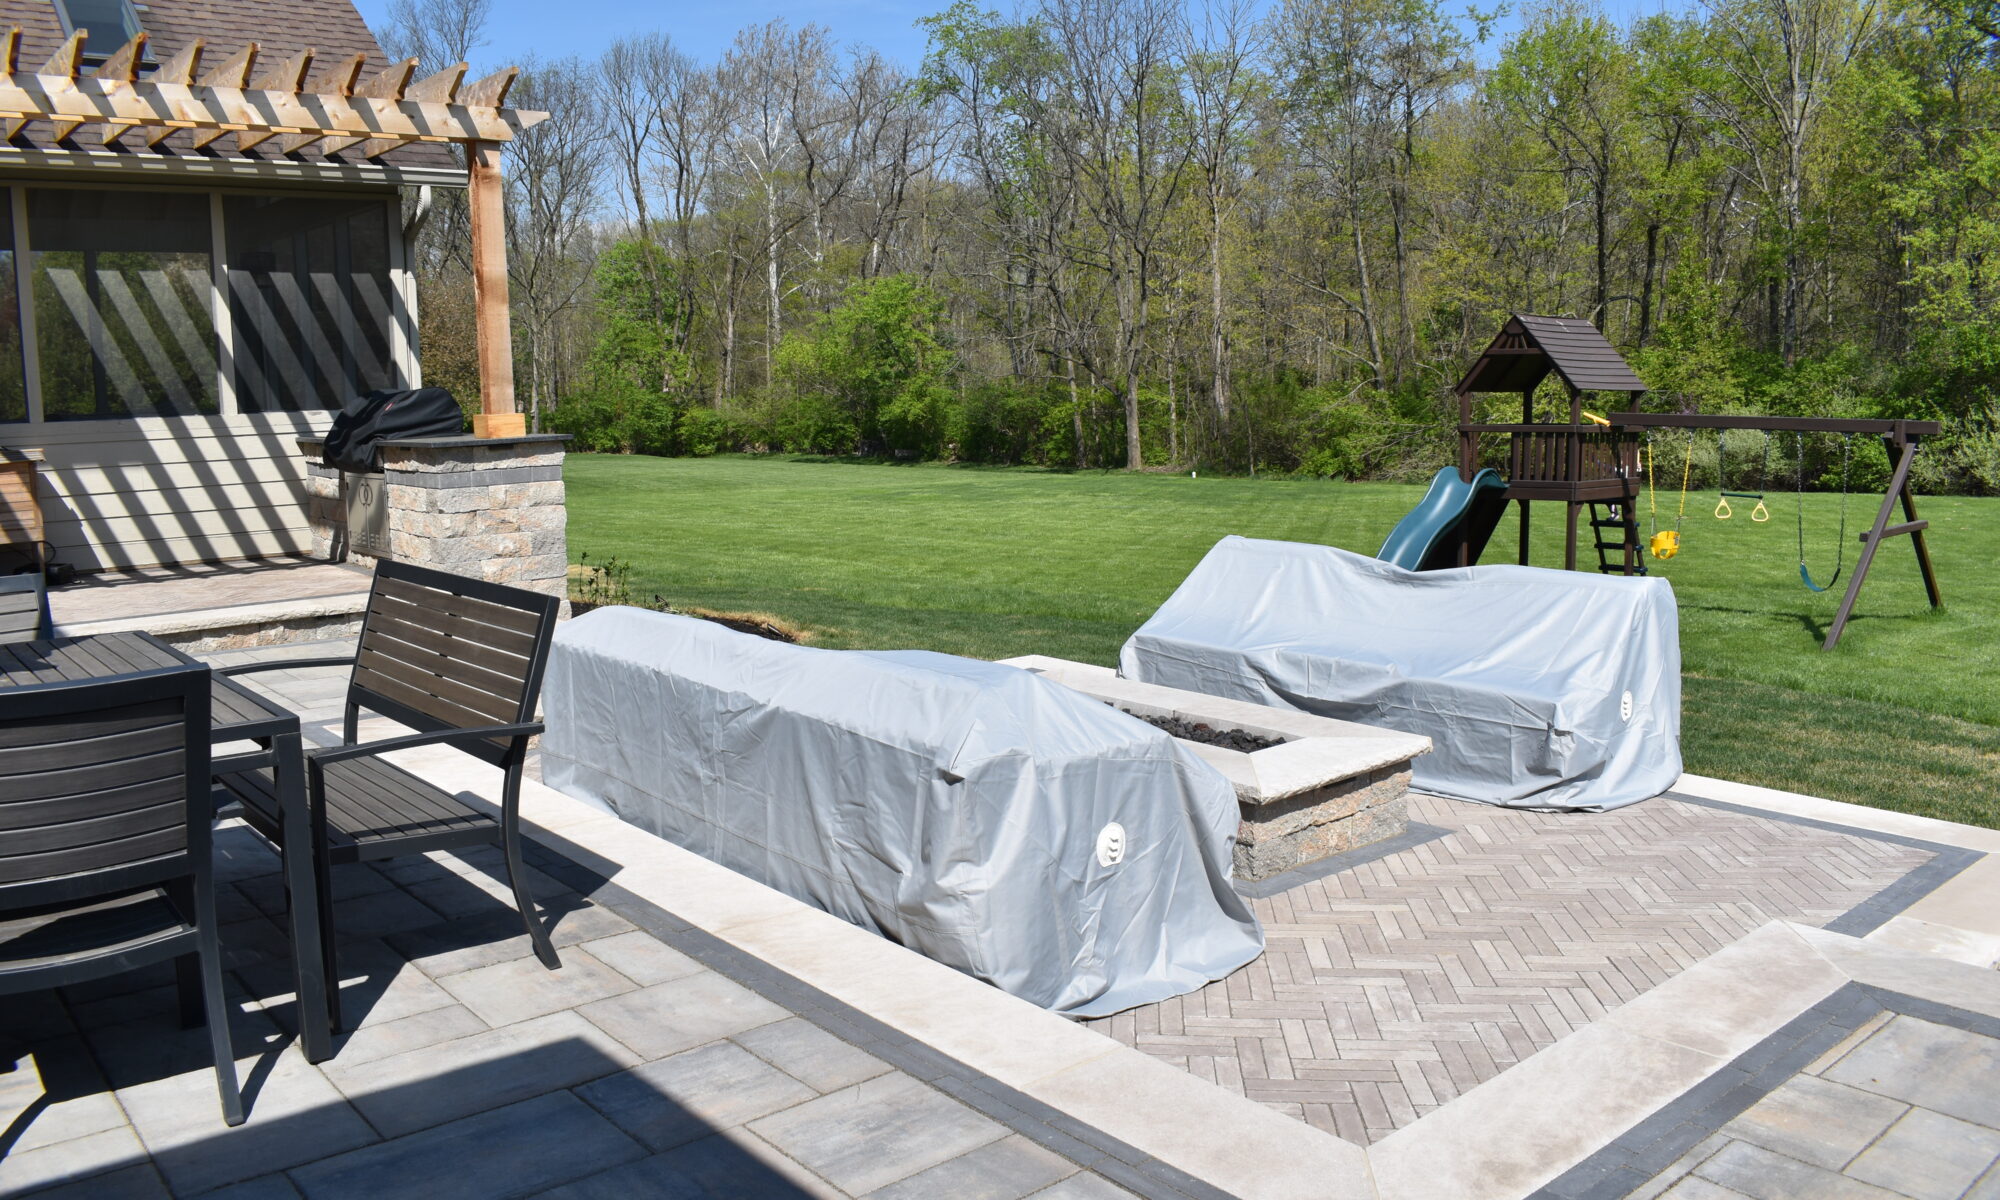 Precision Outdoors Terrace at Fox Run Zionsville Indiana Exterior design and build unilock estate wall river beacon hill flagstone alpine grey fossil unilock mattoni dark charcoal sable brown pergola outdoor kitchen gas fire pit outdoor dining area grill space several entertaining spaces large paver patio multilevel patio custom landscaping sod backyard goals mulch tree plants outdoor lighting